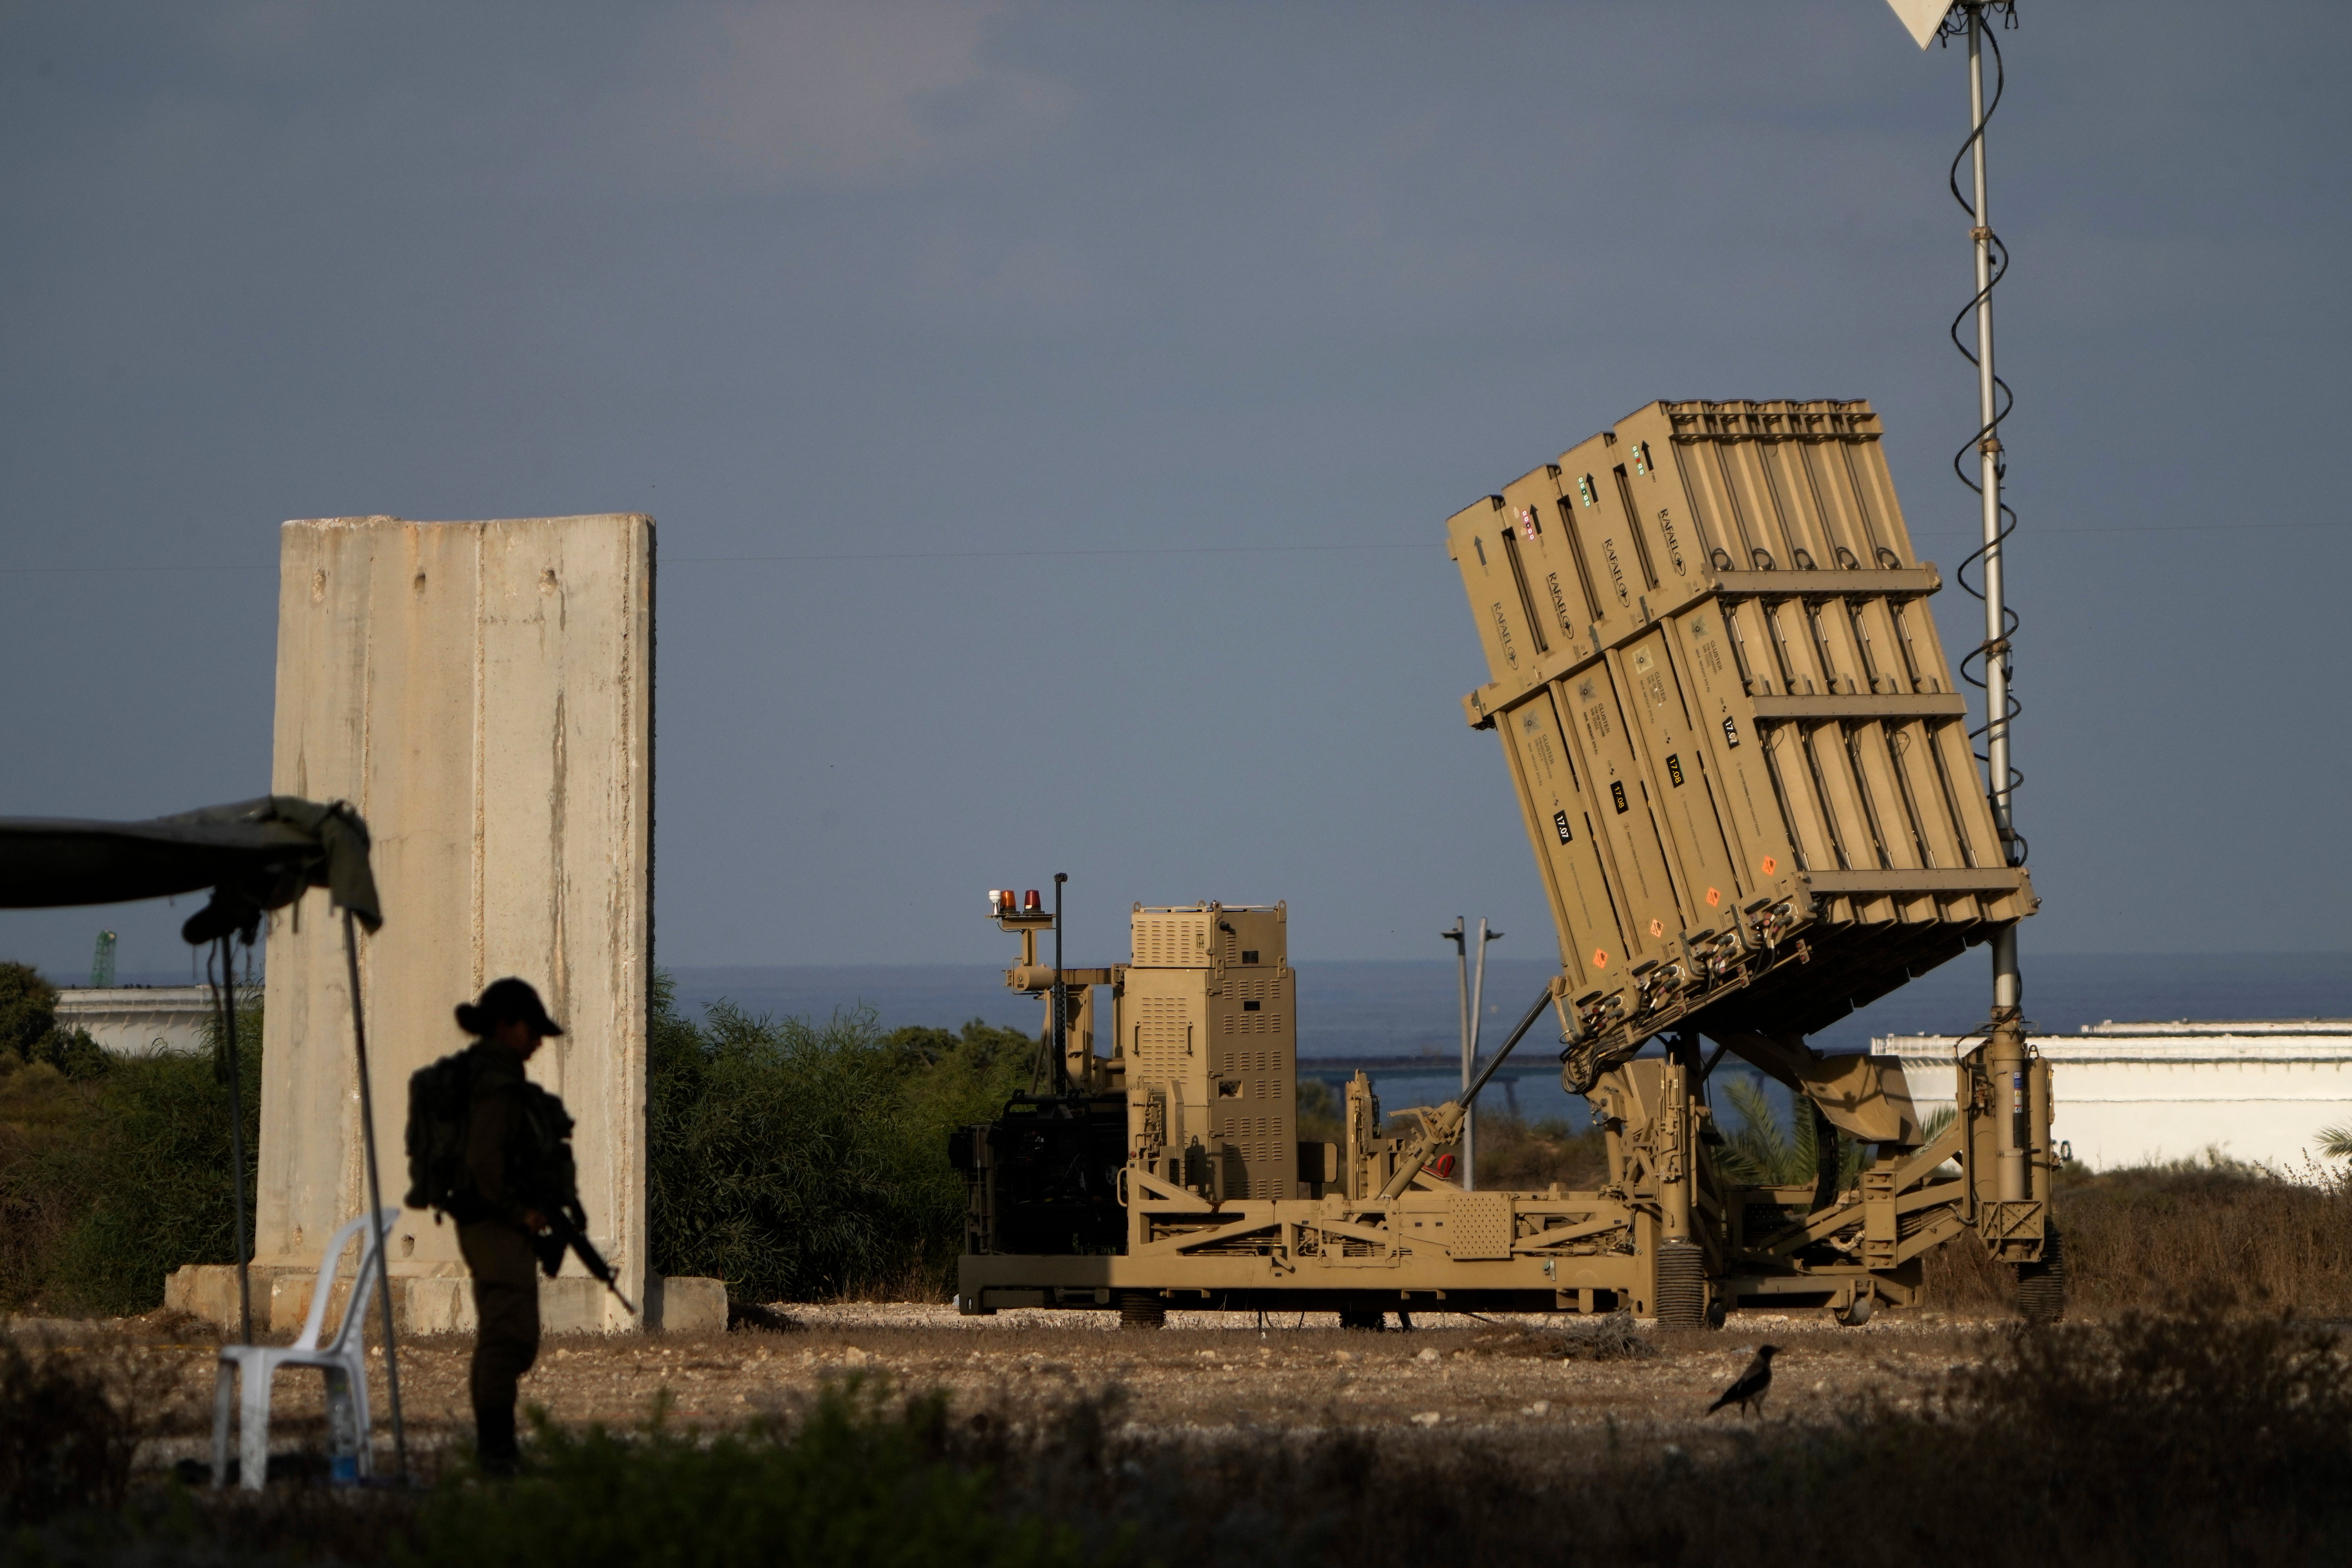 A battery of Israel's Iron Dome defense missile system, deployed to intercept rockets flying over Israeli airspace